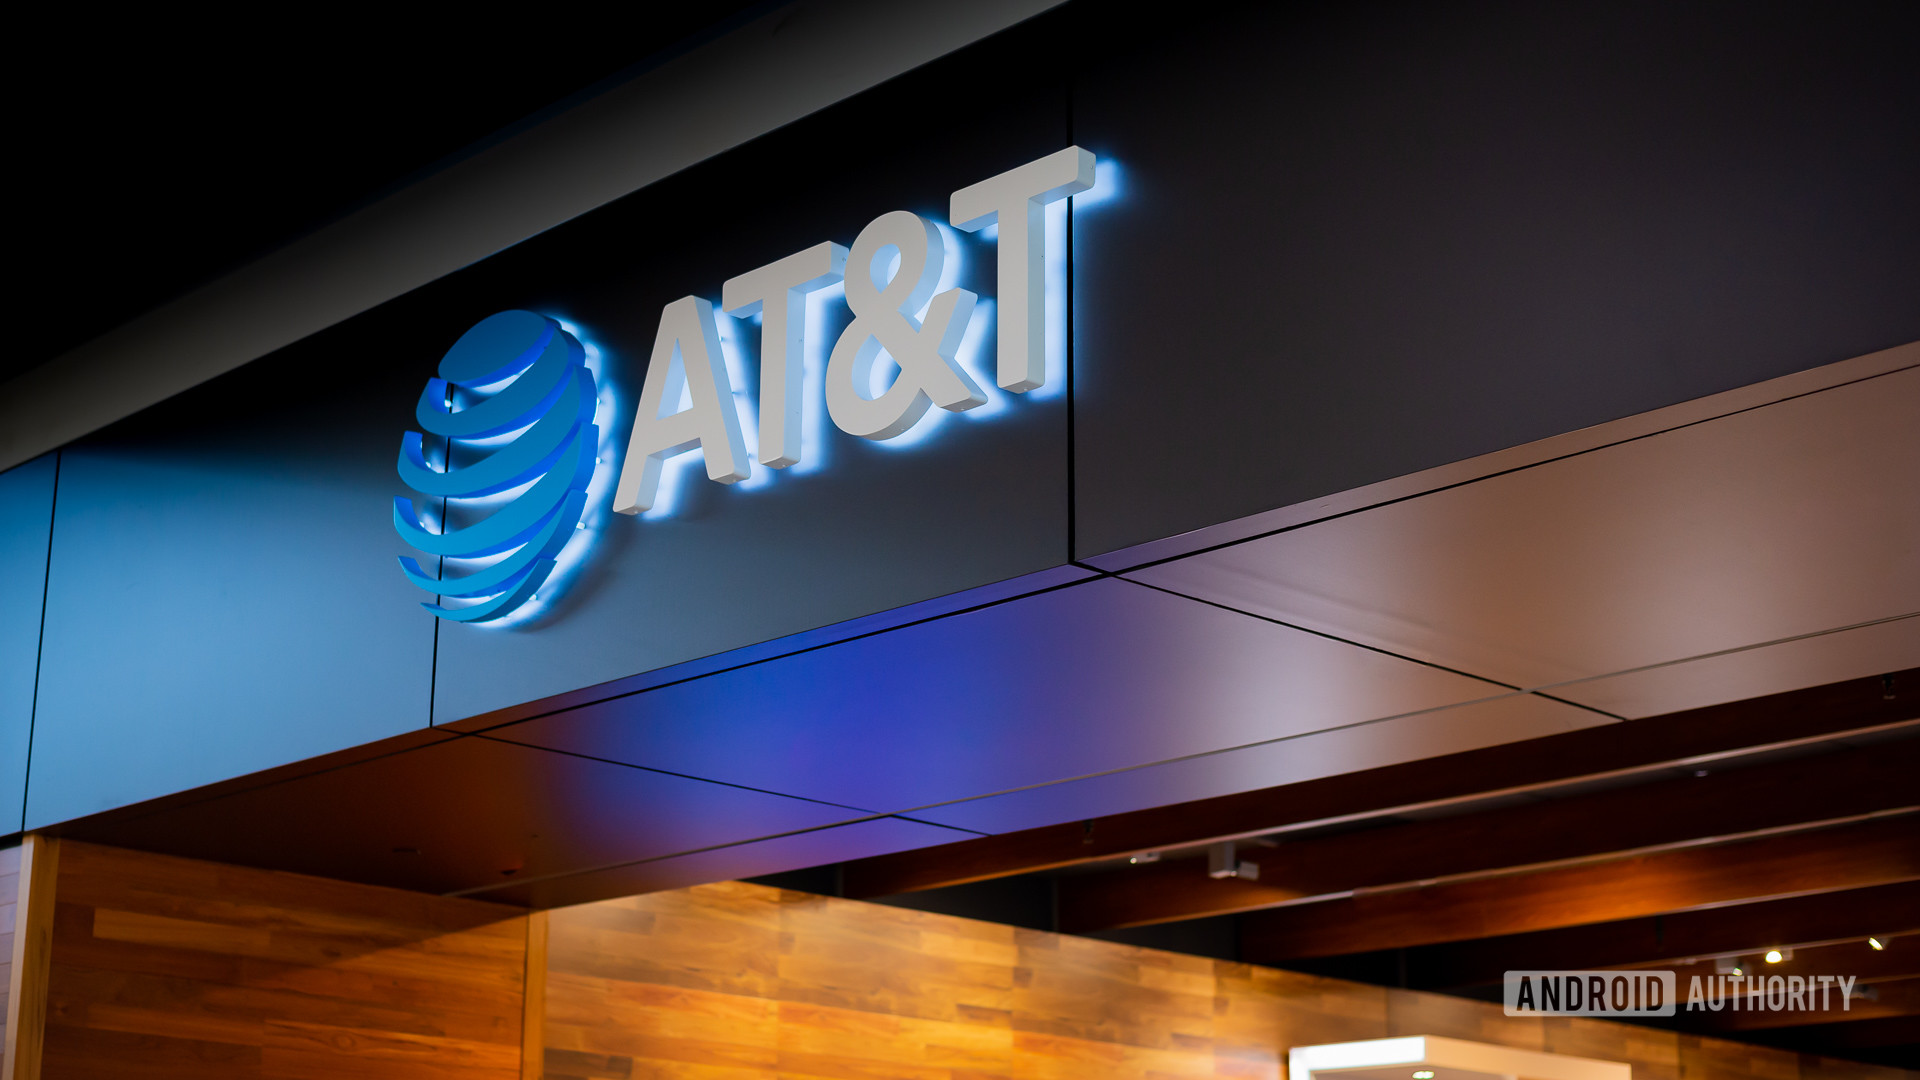 ‘Turbo’ Service From AT&T Claims To Improve Your Network Performance for $7 per Month